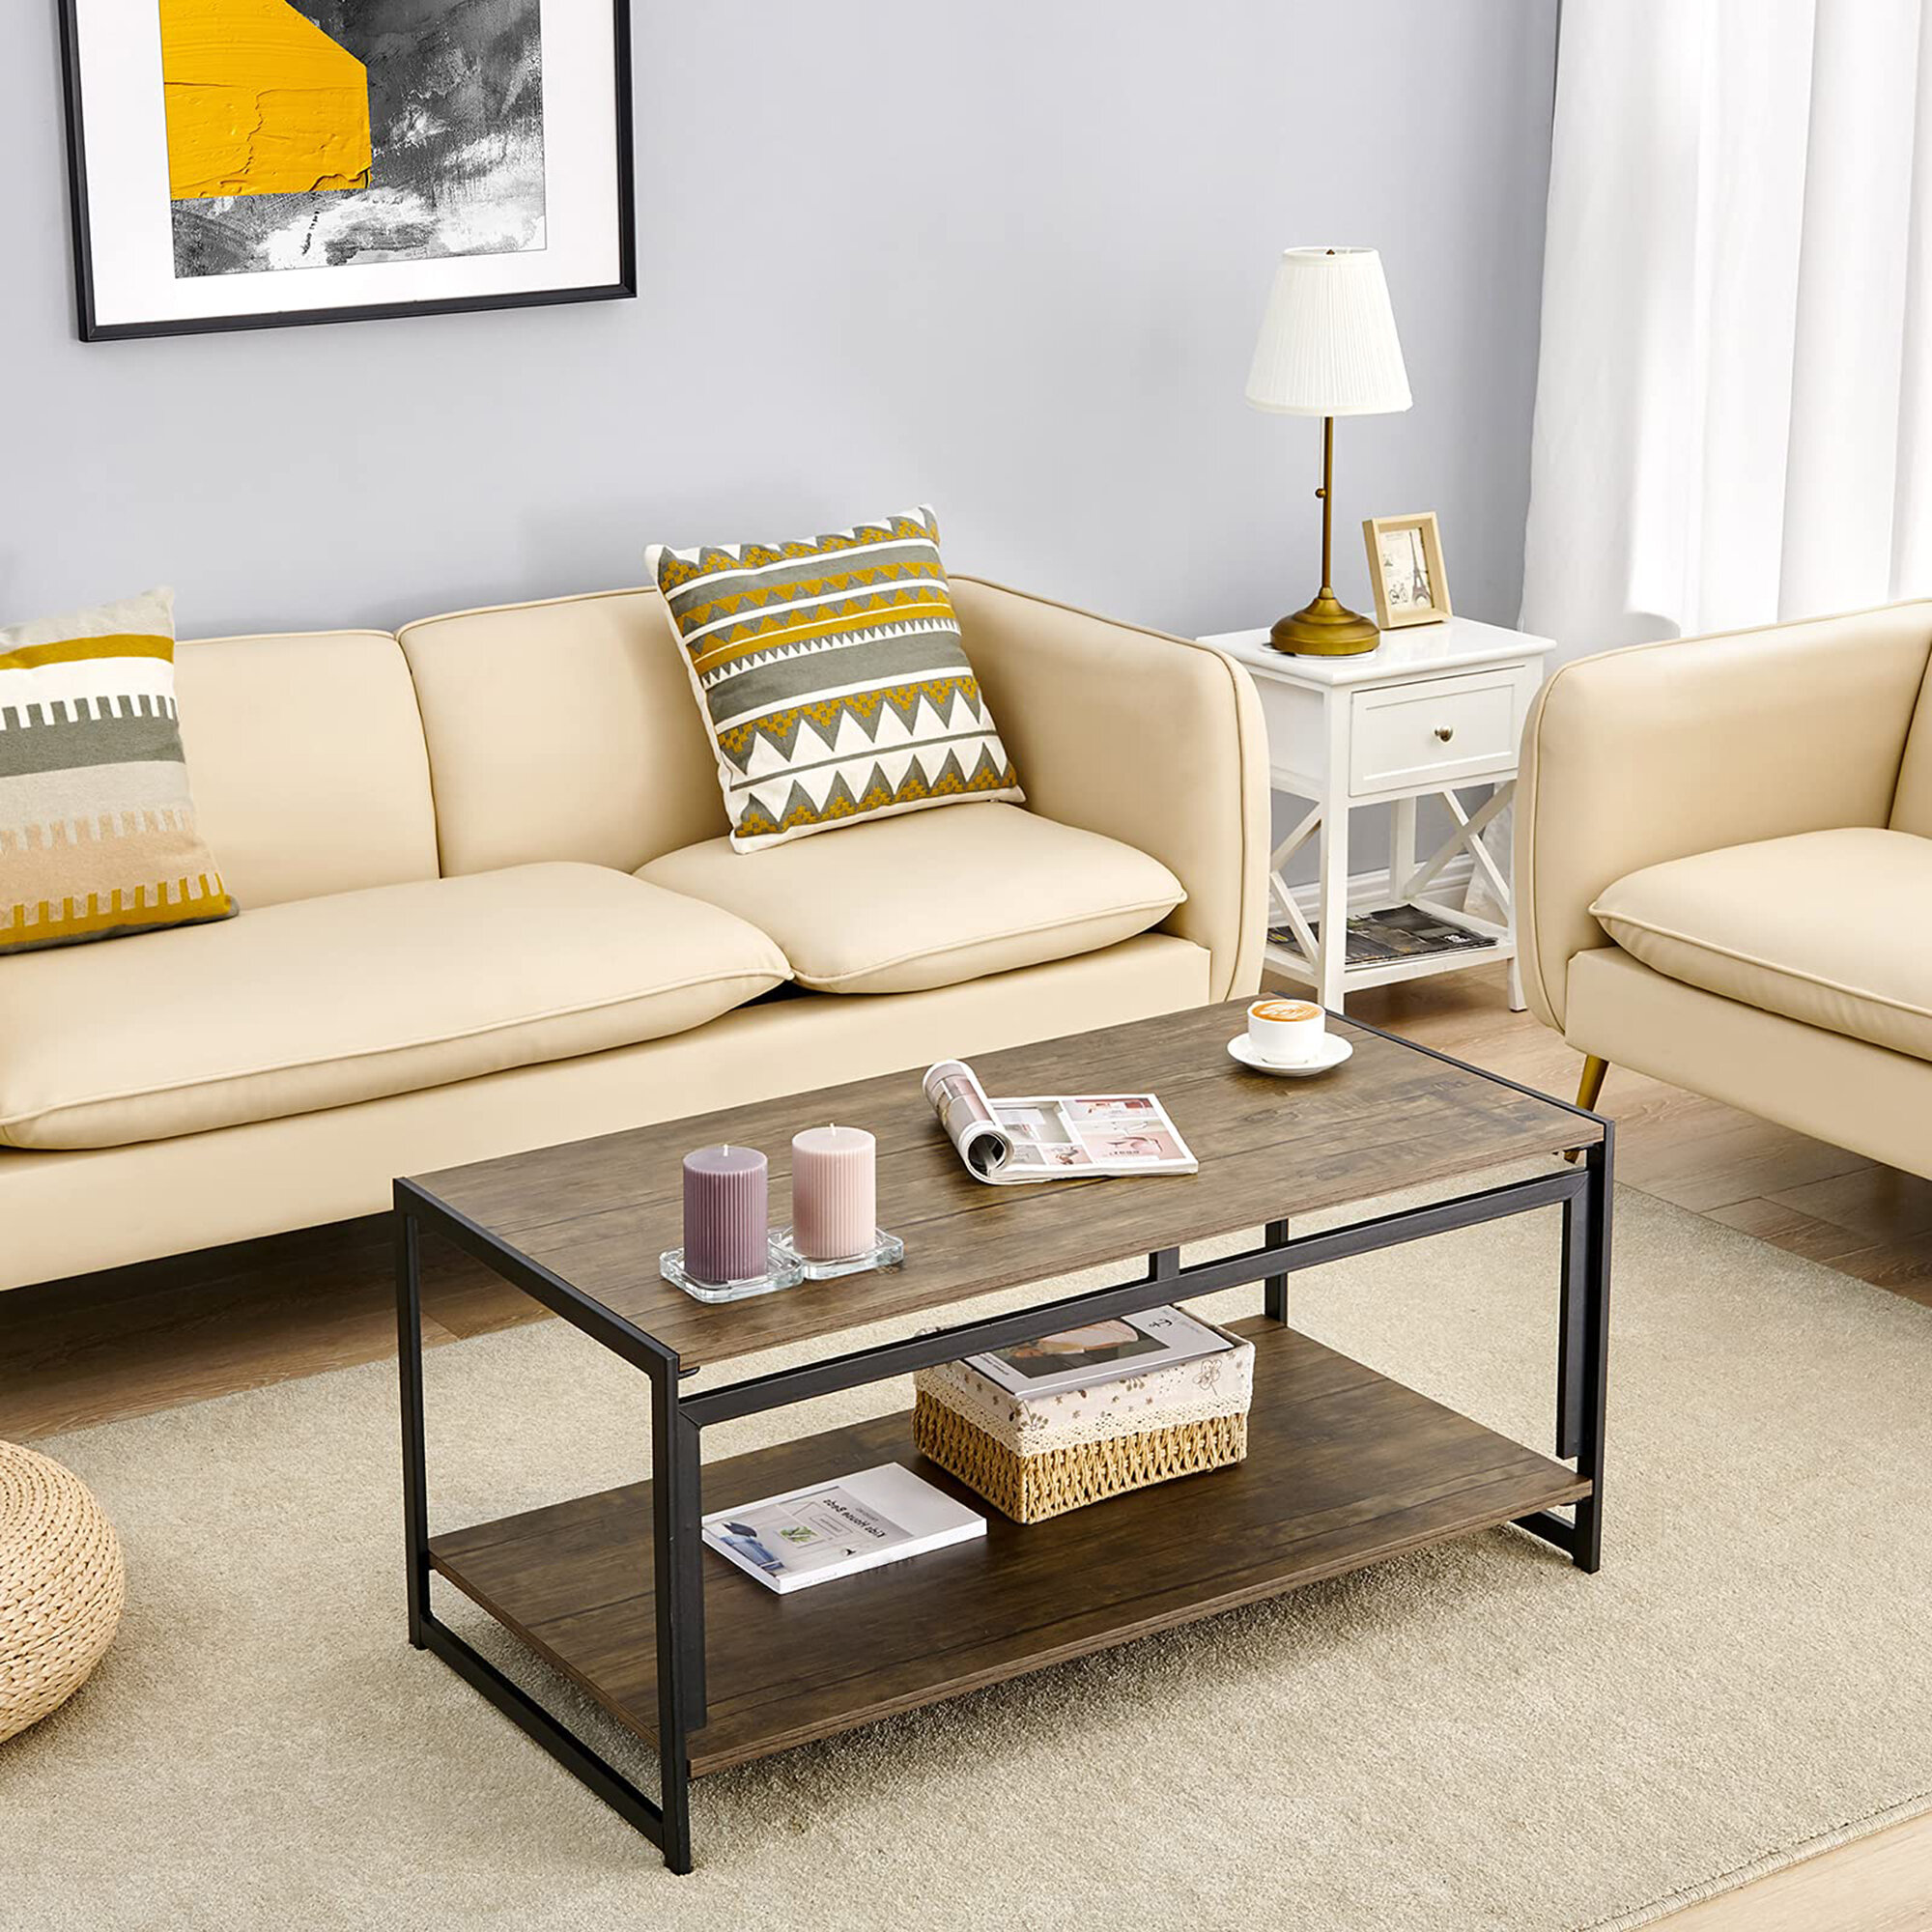 2 Tier Cocktail Table with Storage Shelf for Living Room Look Accent Furniture with Metal Frame Modern Studio Collection Classic Rectangular Modern Home Coffee Table